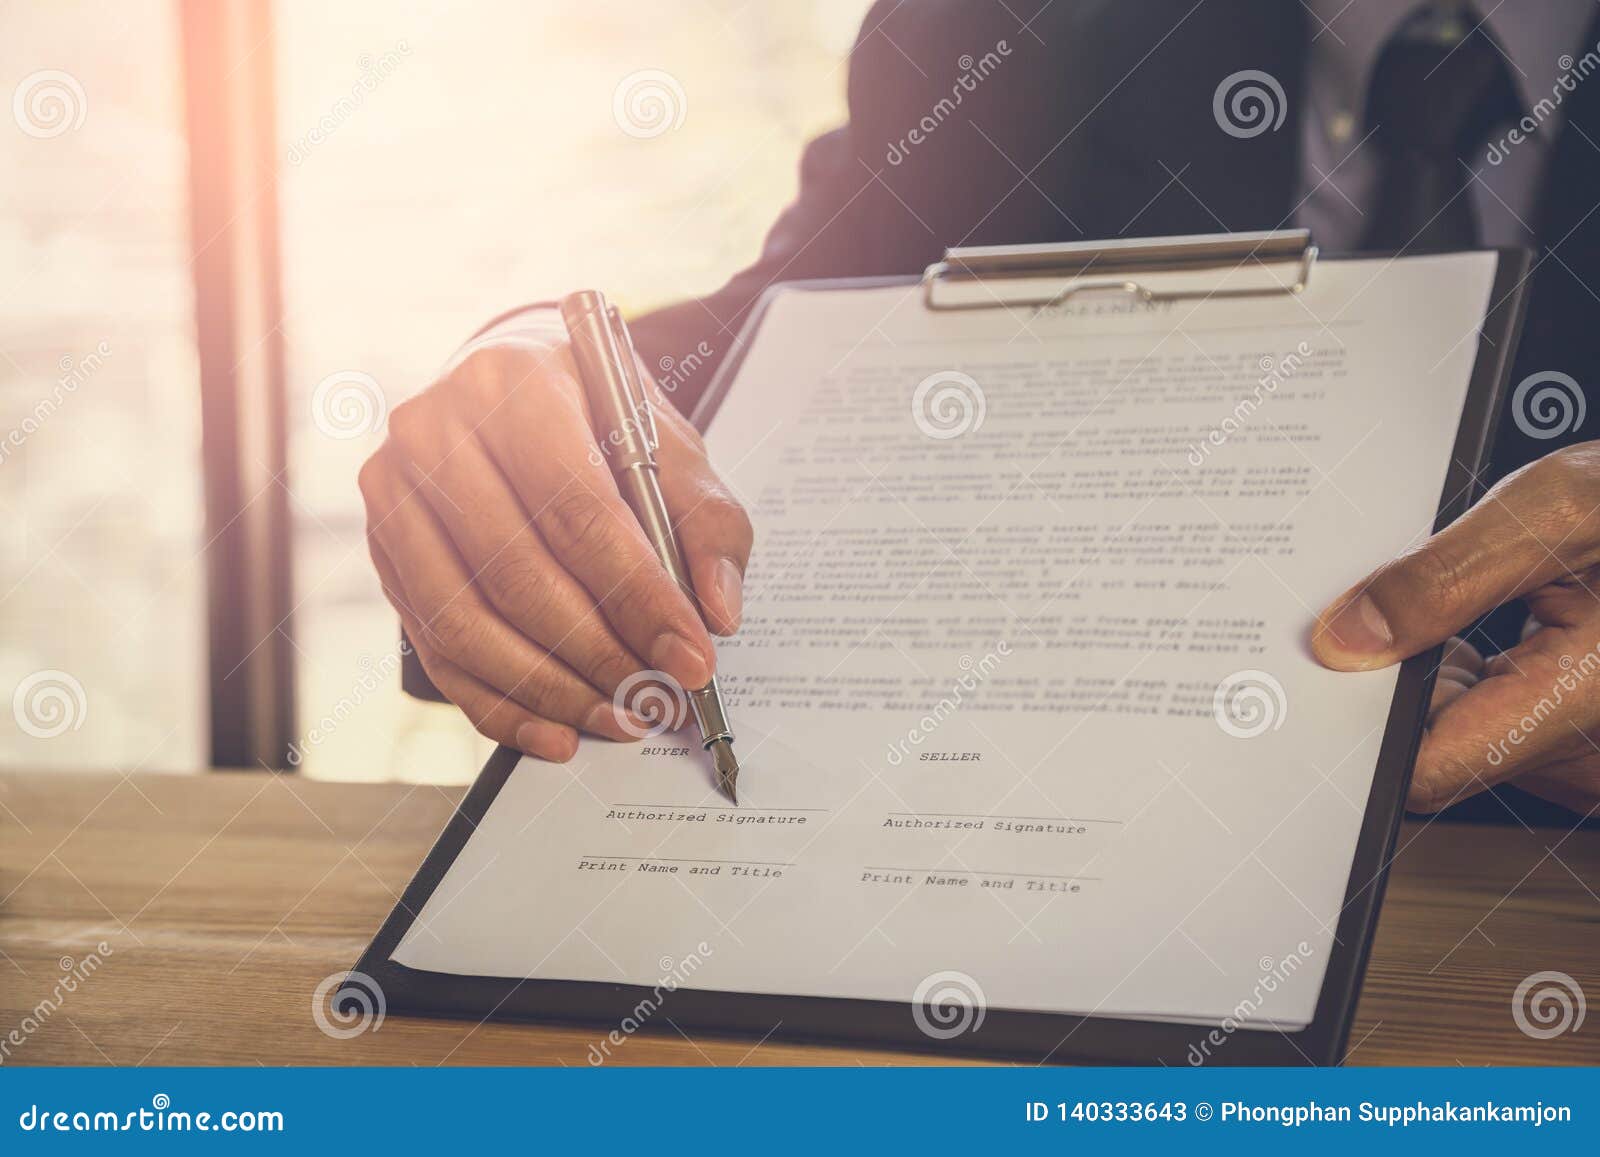 business man signing a contract. owns the business sign personally, director of the company, solicitor. real estate agent holding